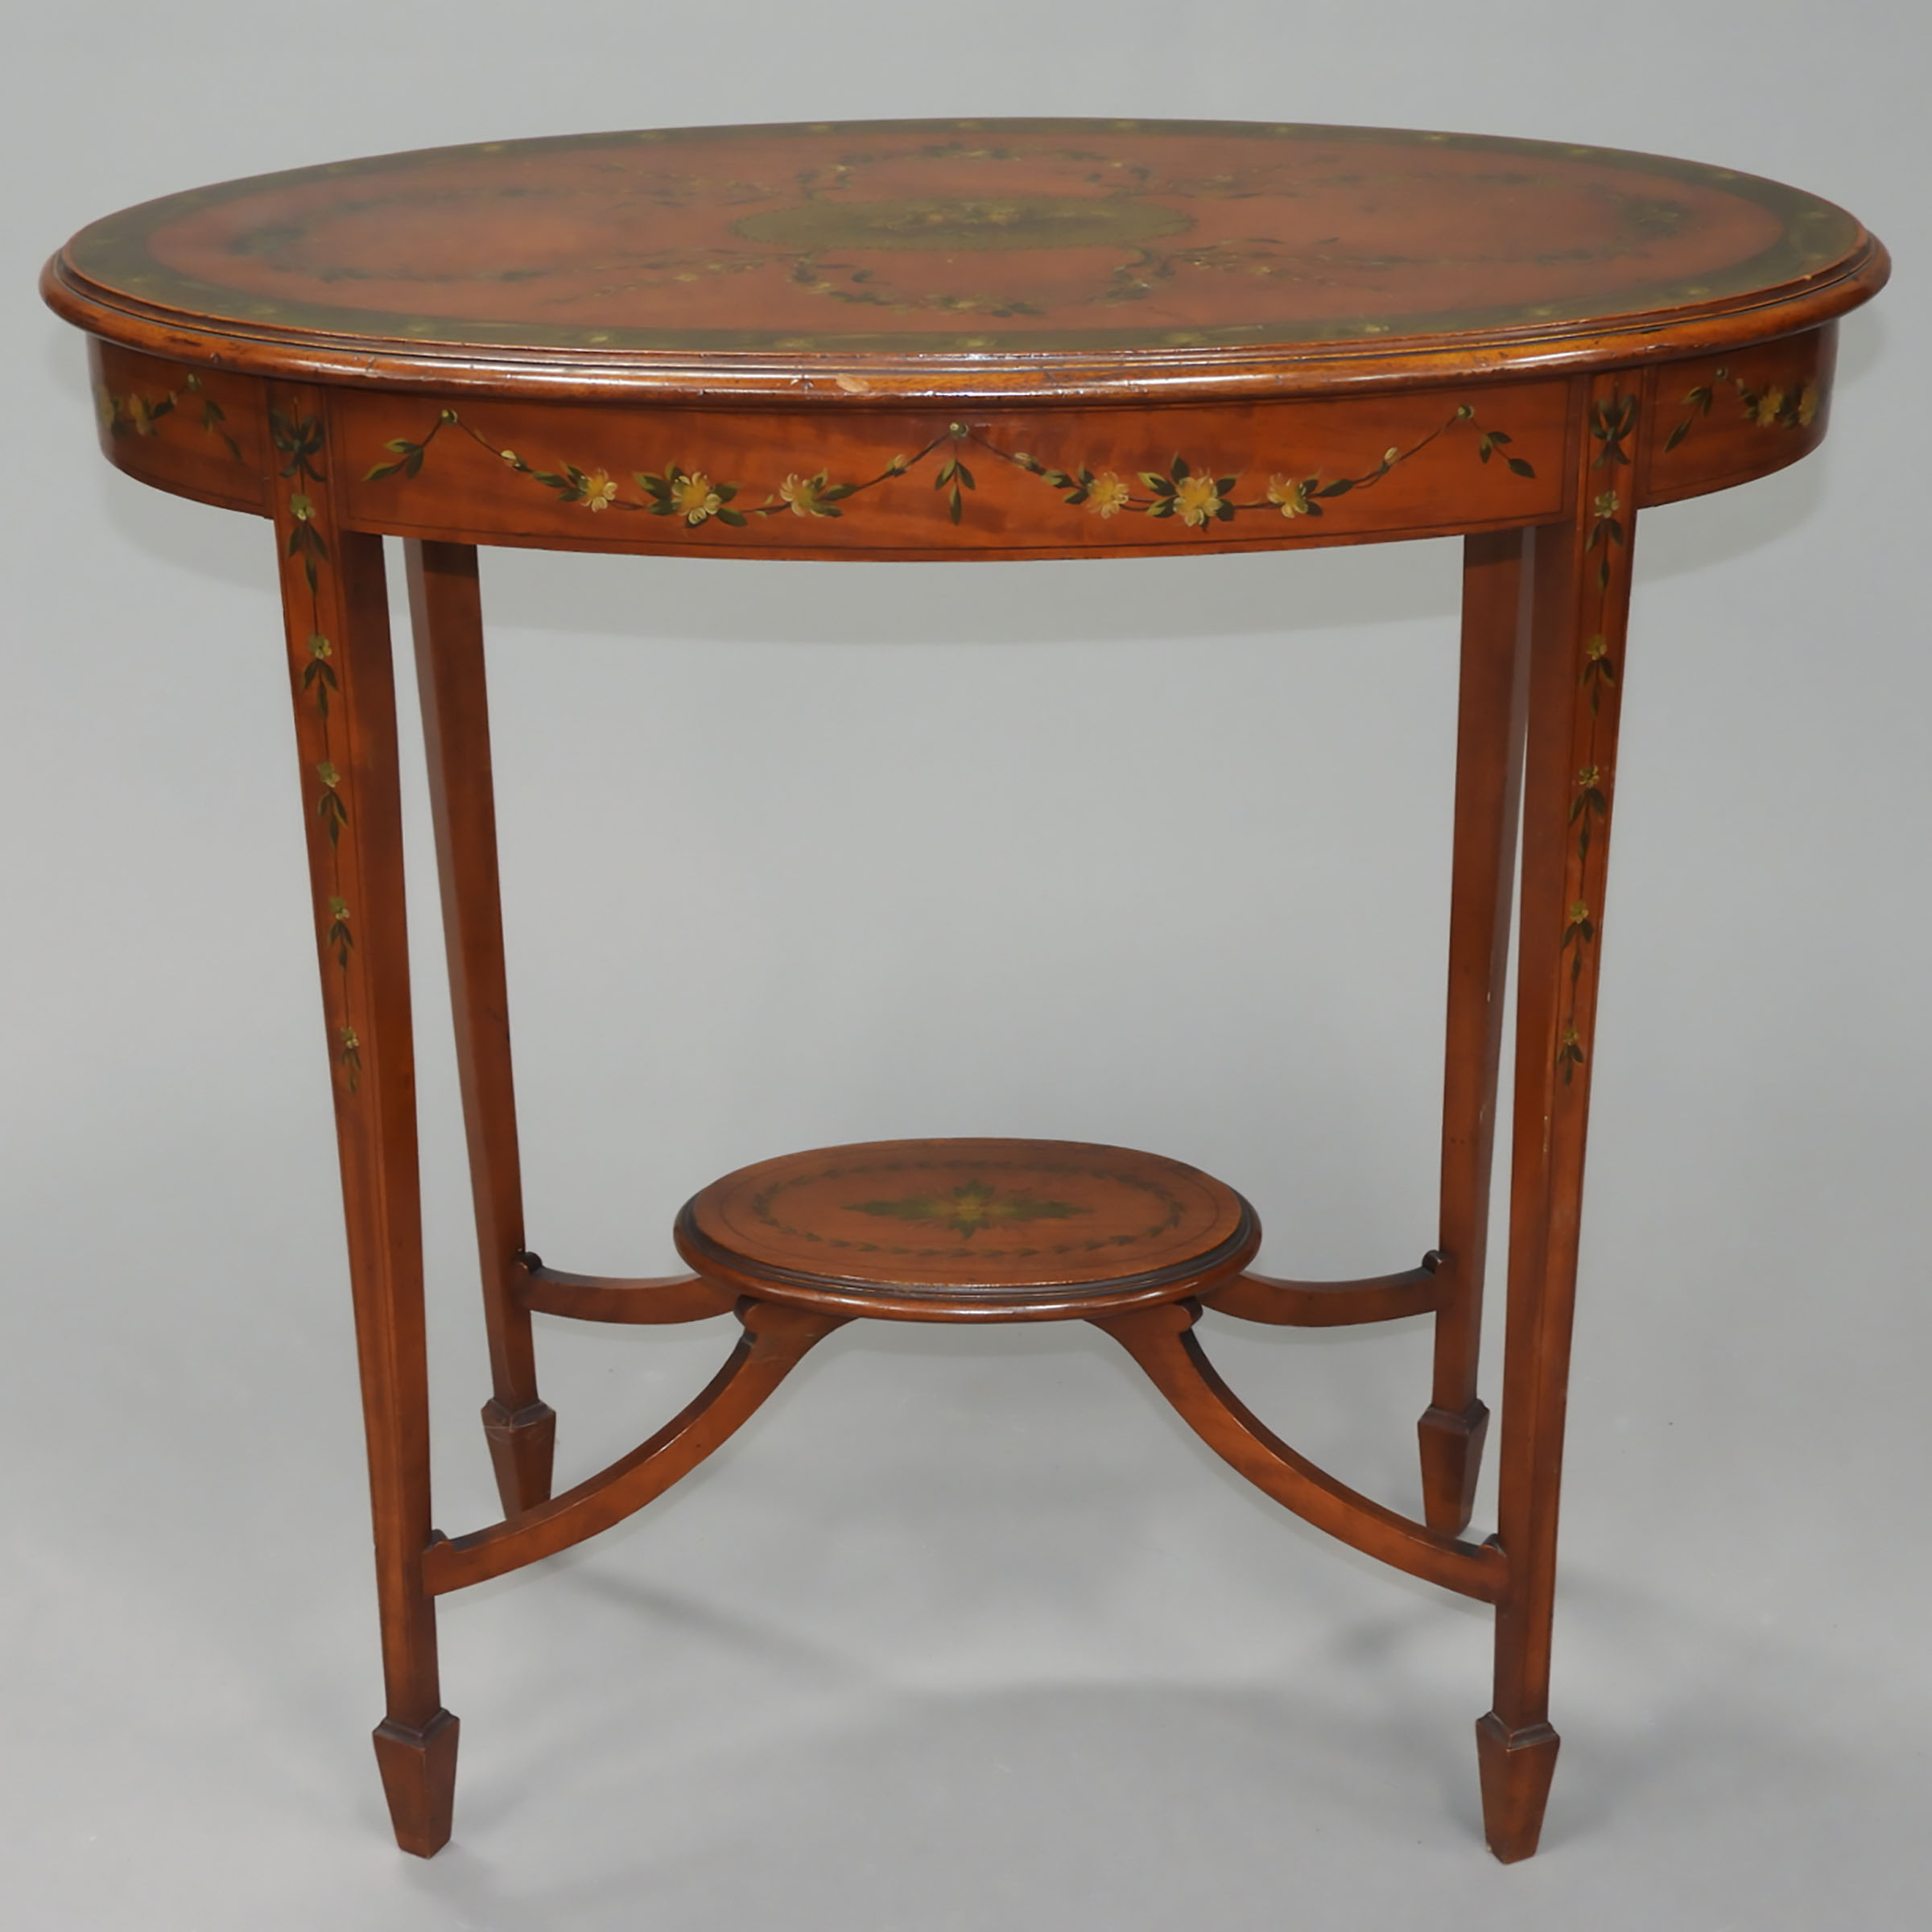 Small Neoclassical Painted Satinwood Oval Occasional Table, c.1900